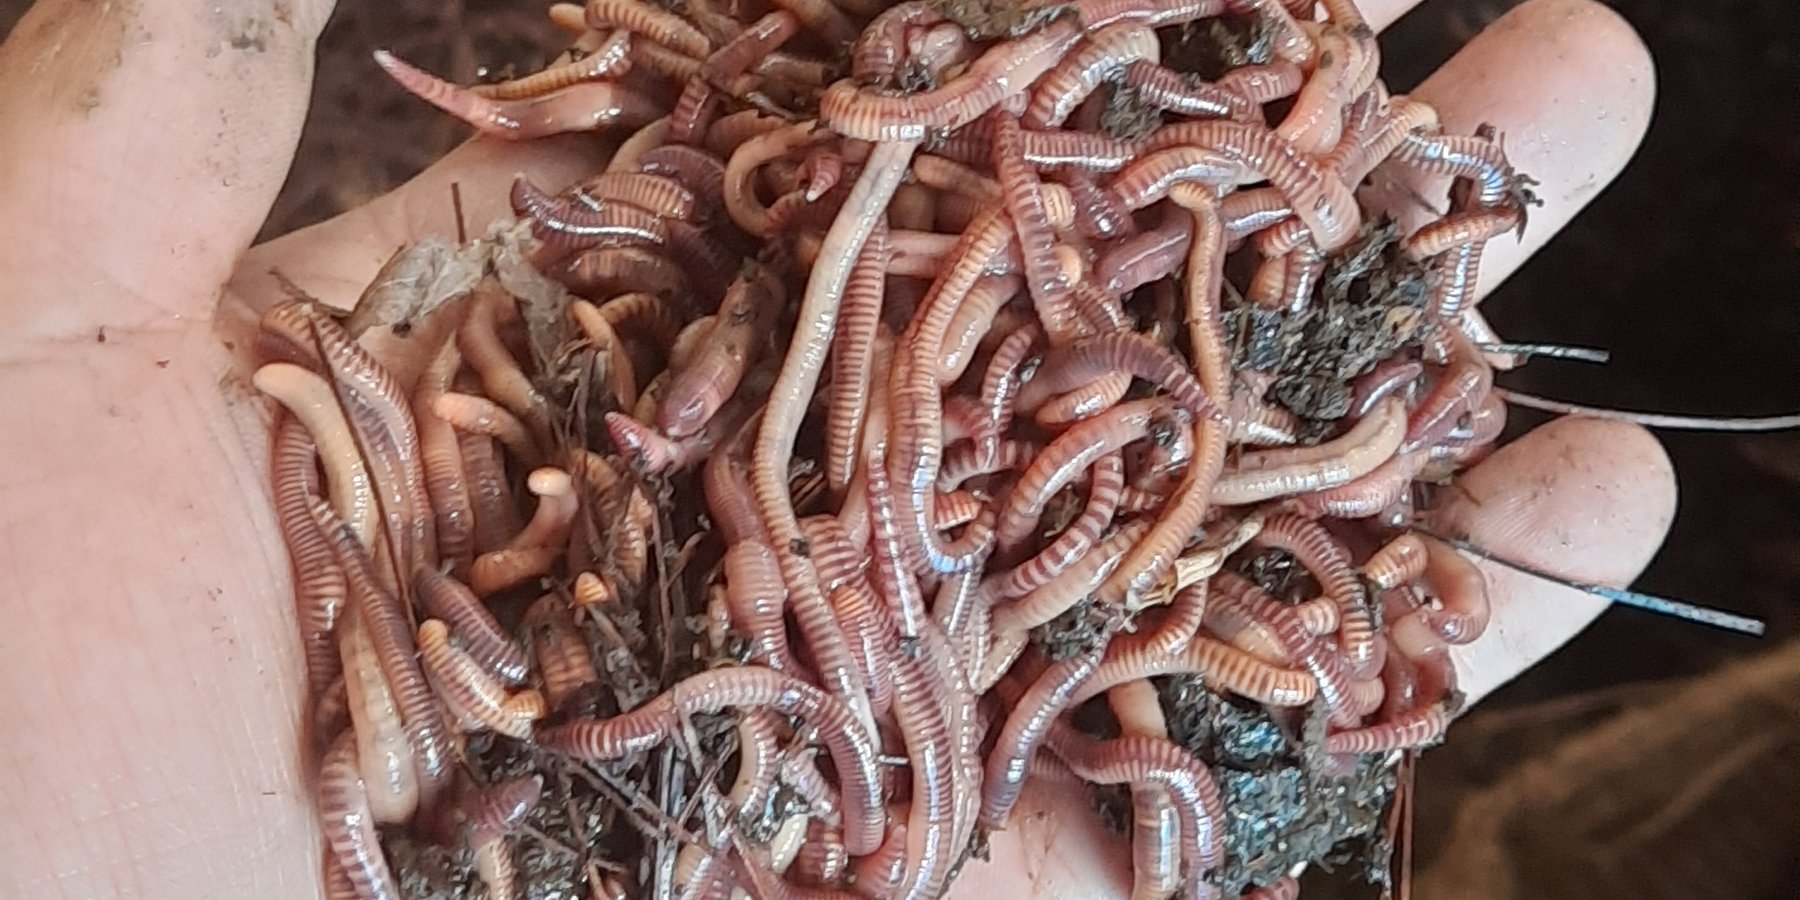 Earthworms used for vermicomposting